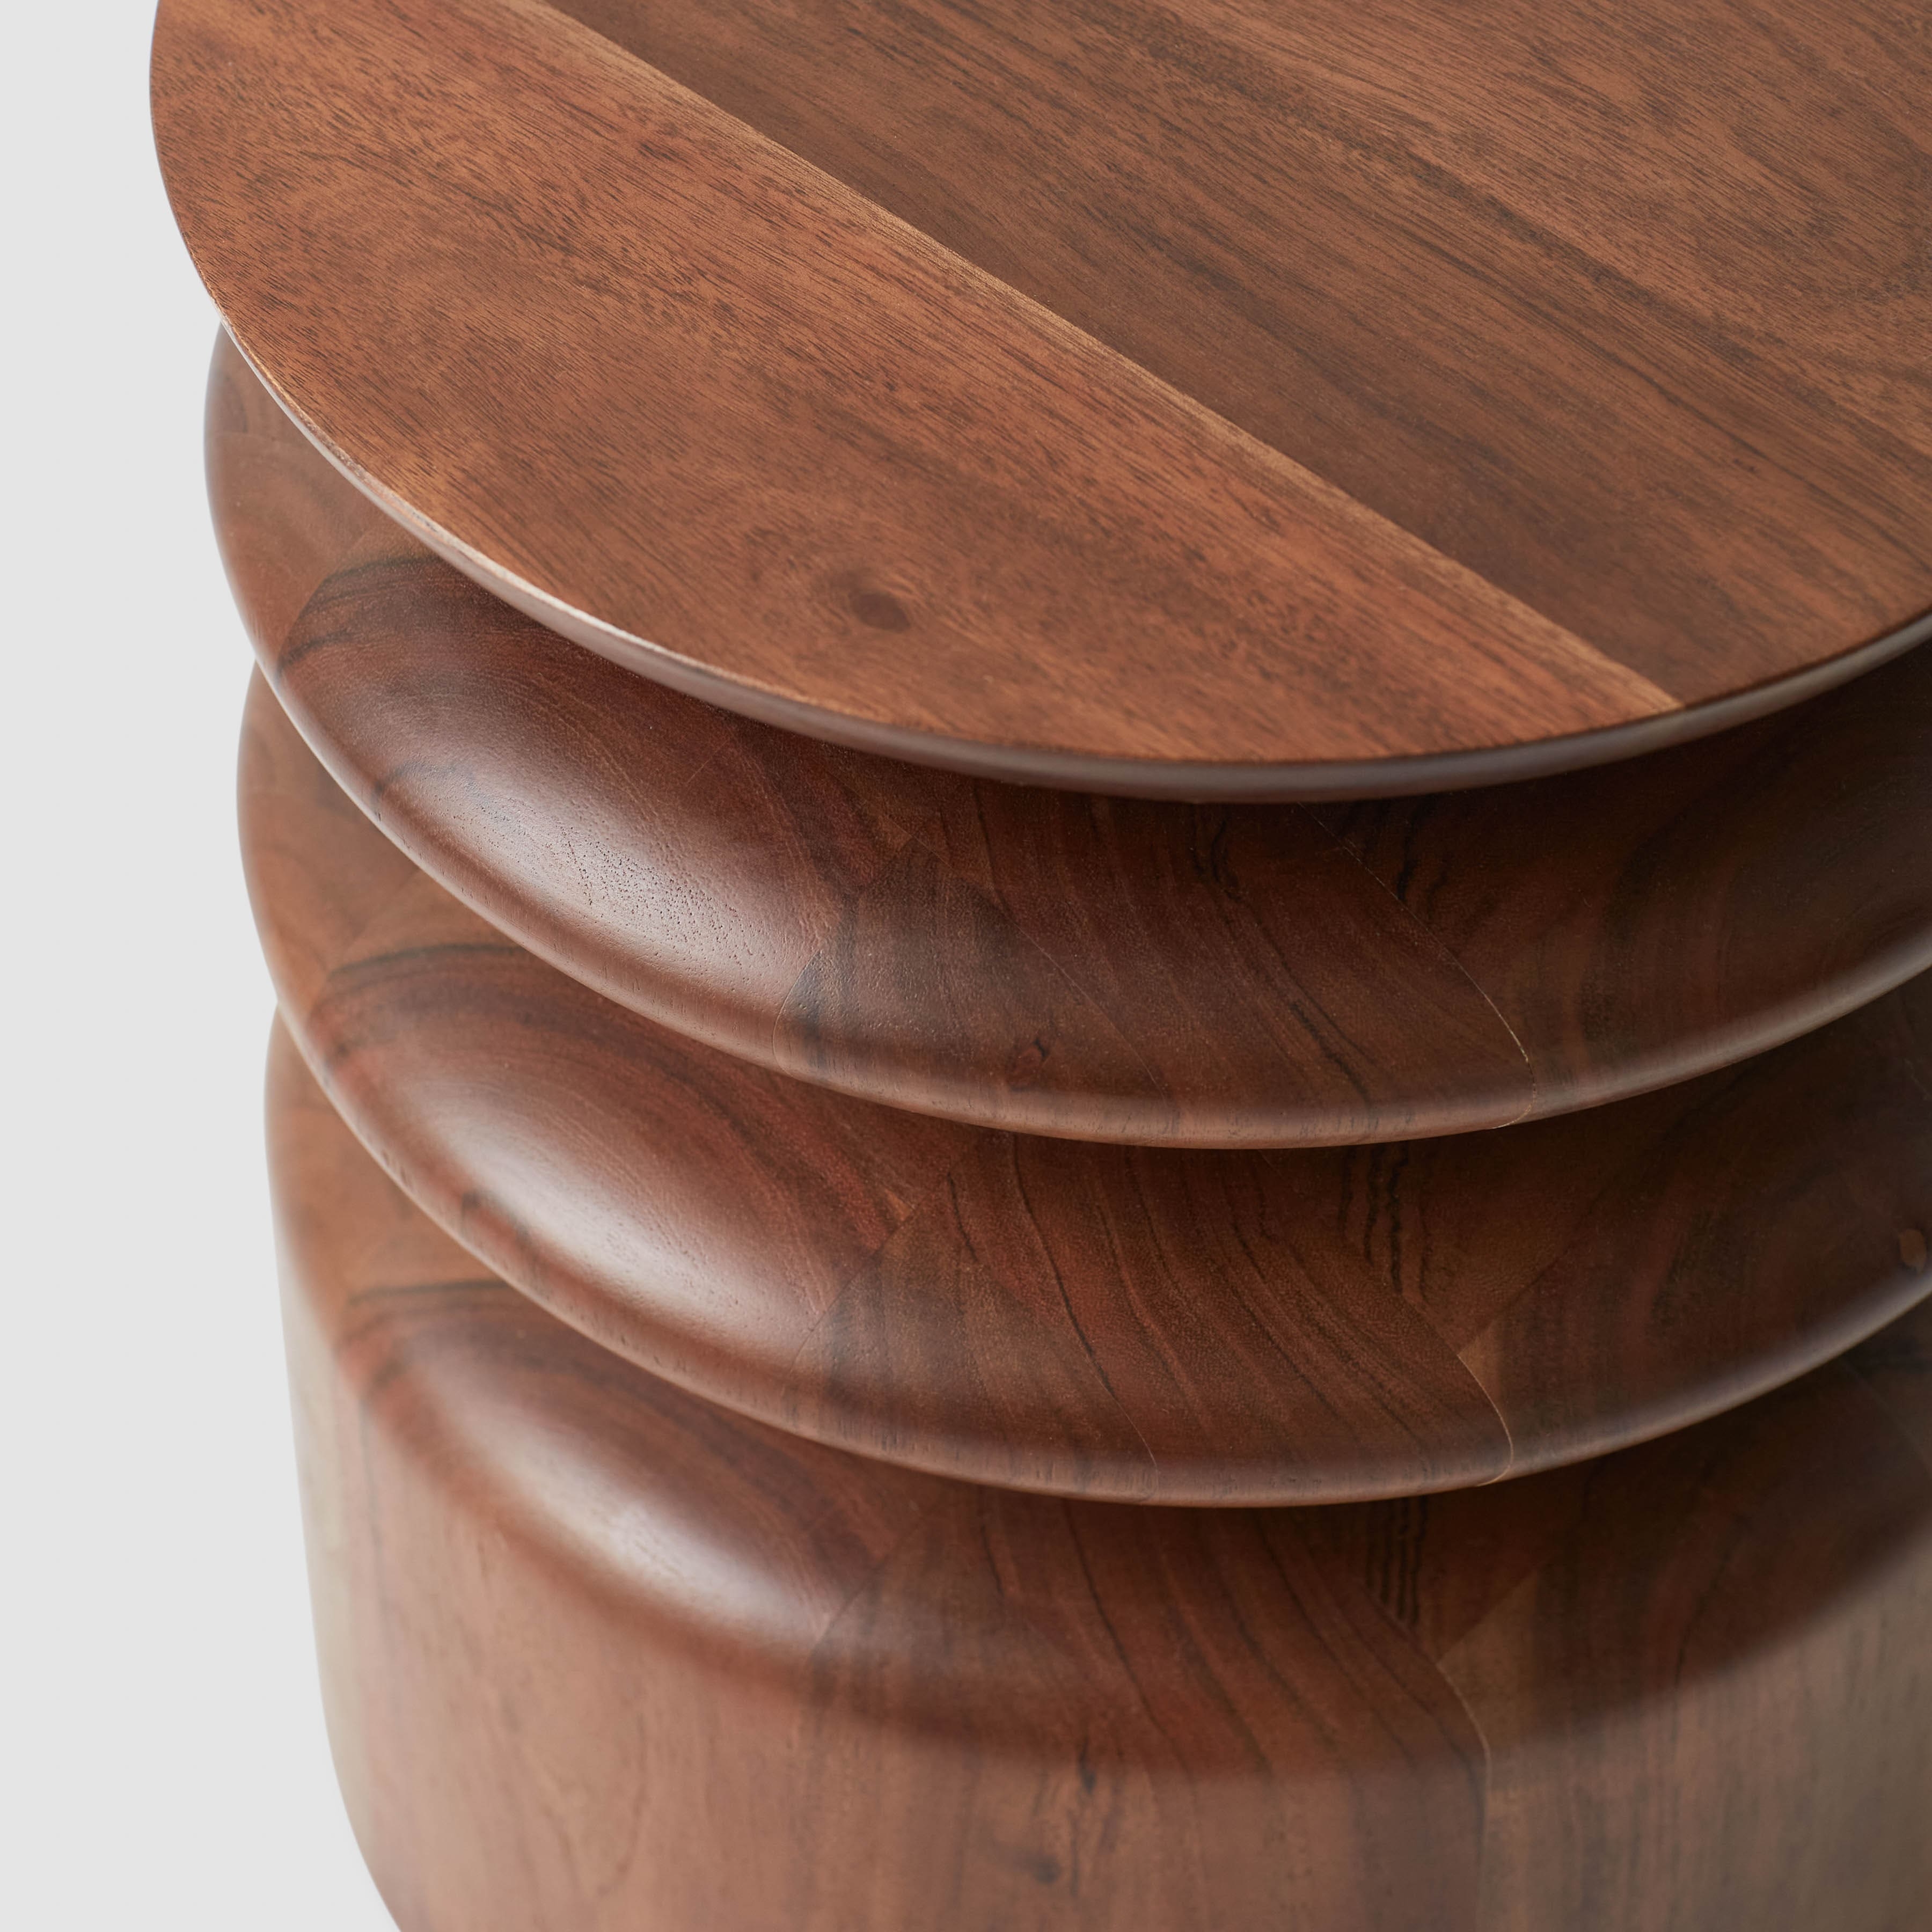 The Citizenry Mishka Wood Side Table - Image 5